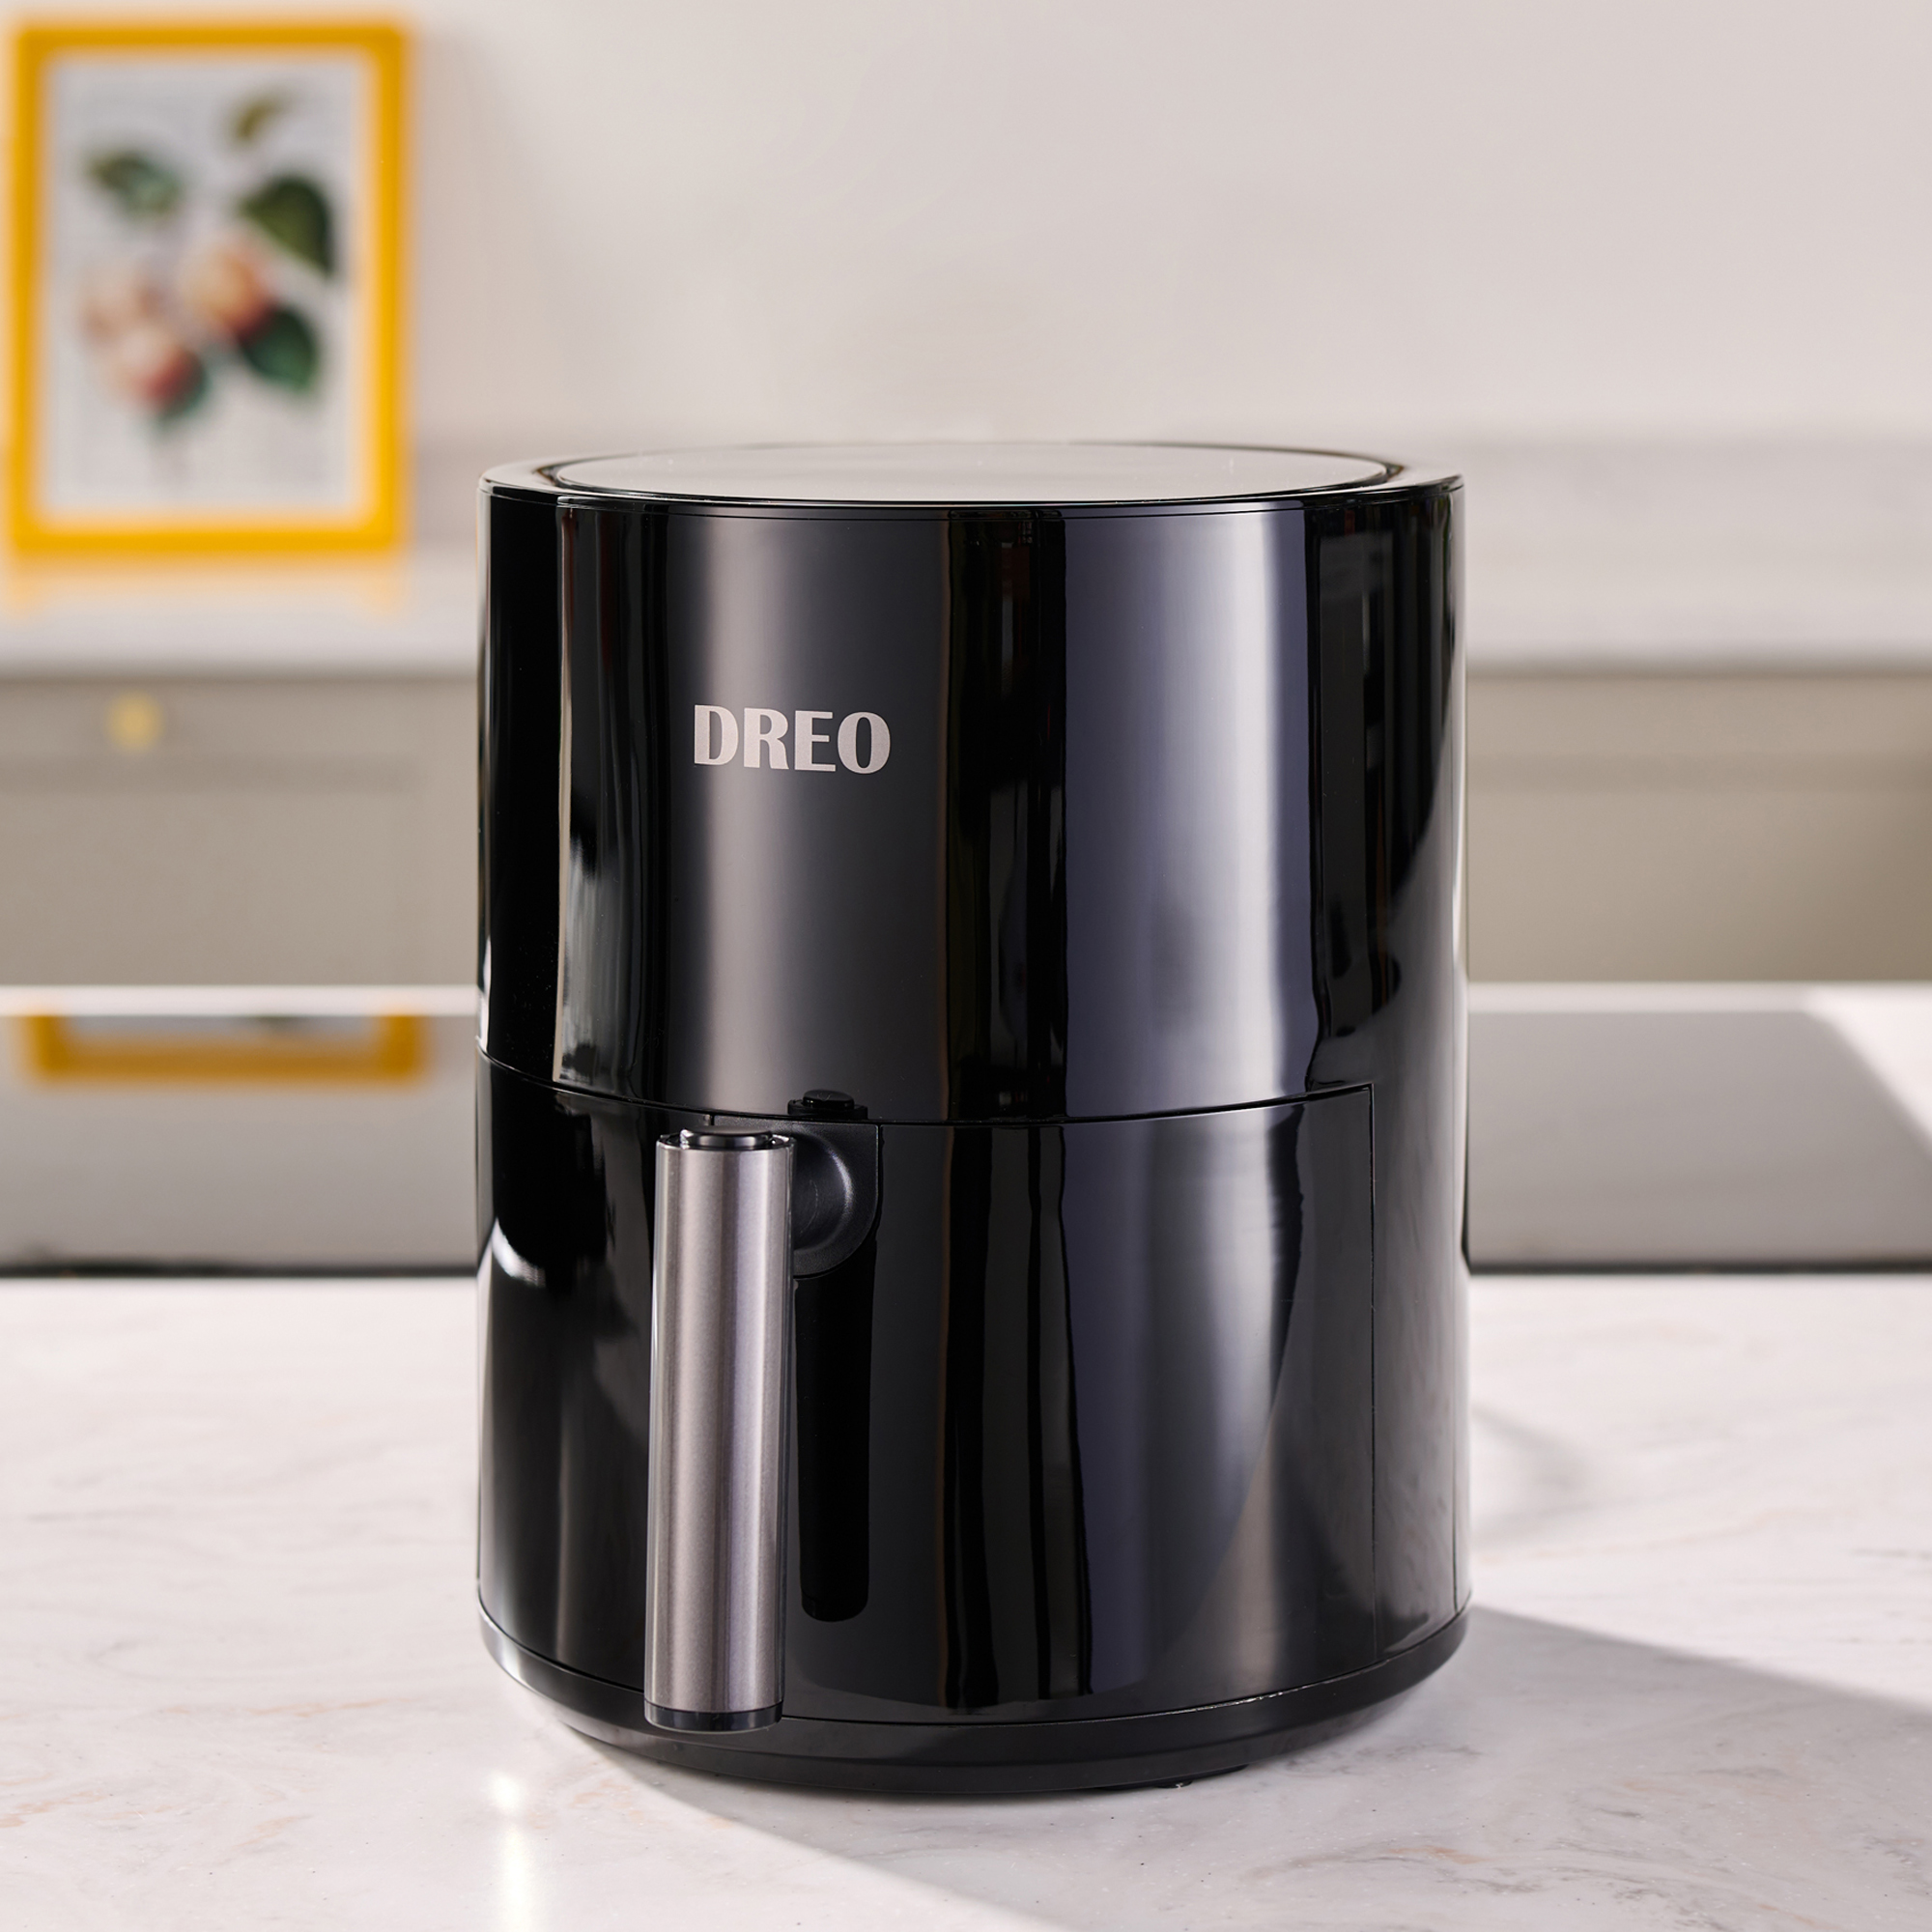 Dreo Air Fryer review: a great compact cooker